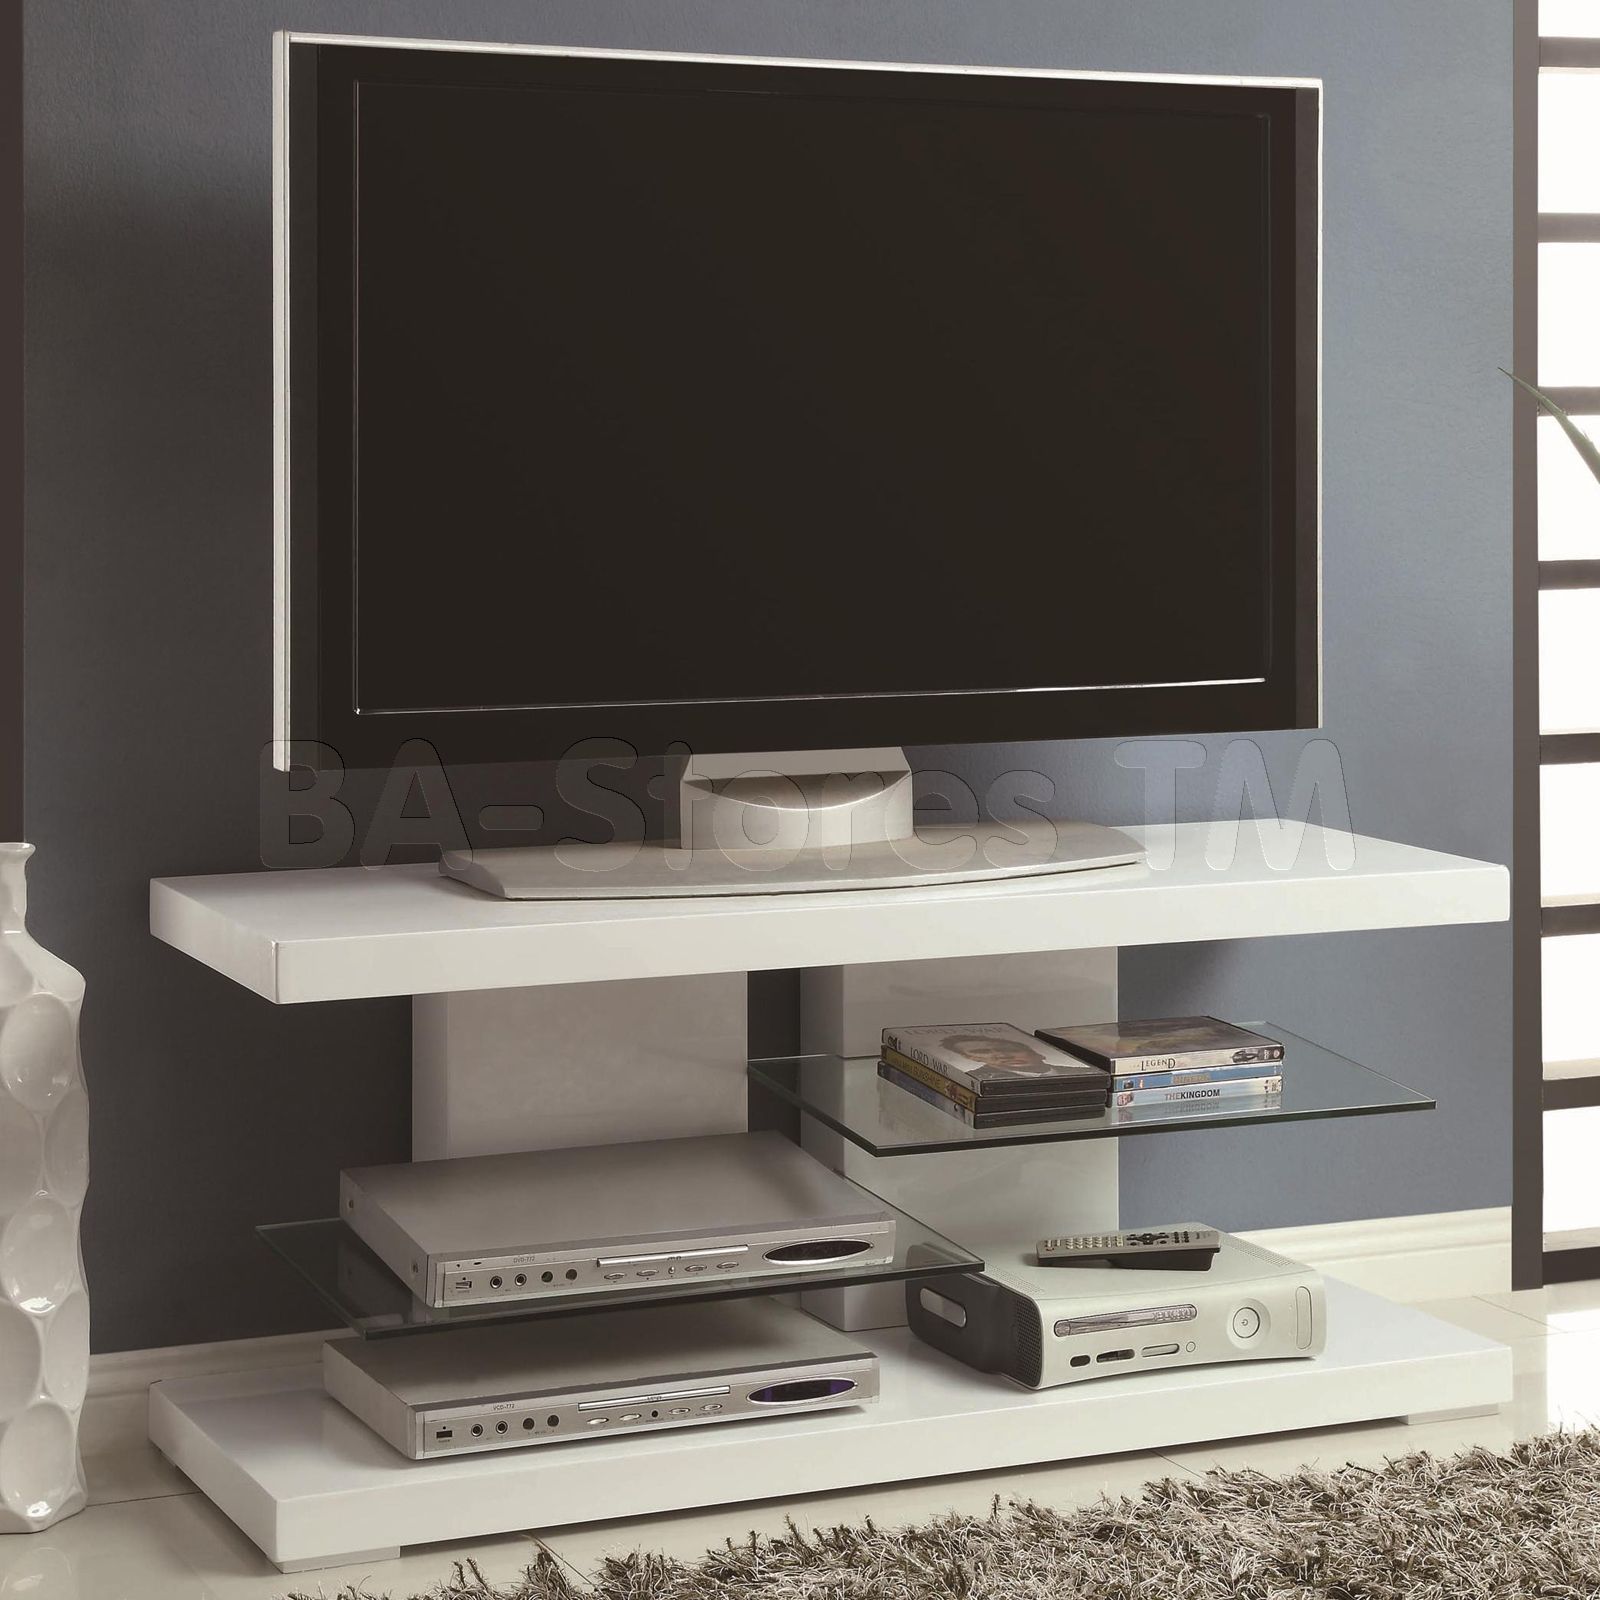 Simple Tv Stand | White Tv Stands, Unique Tv Stands Throughout Unusual Tv Units (View 2 of 15)